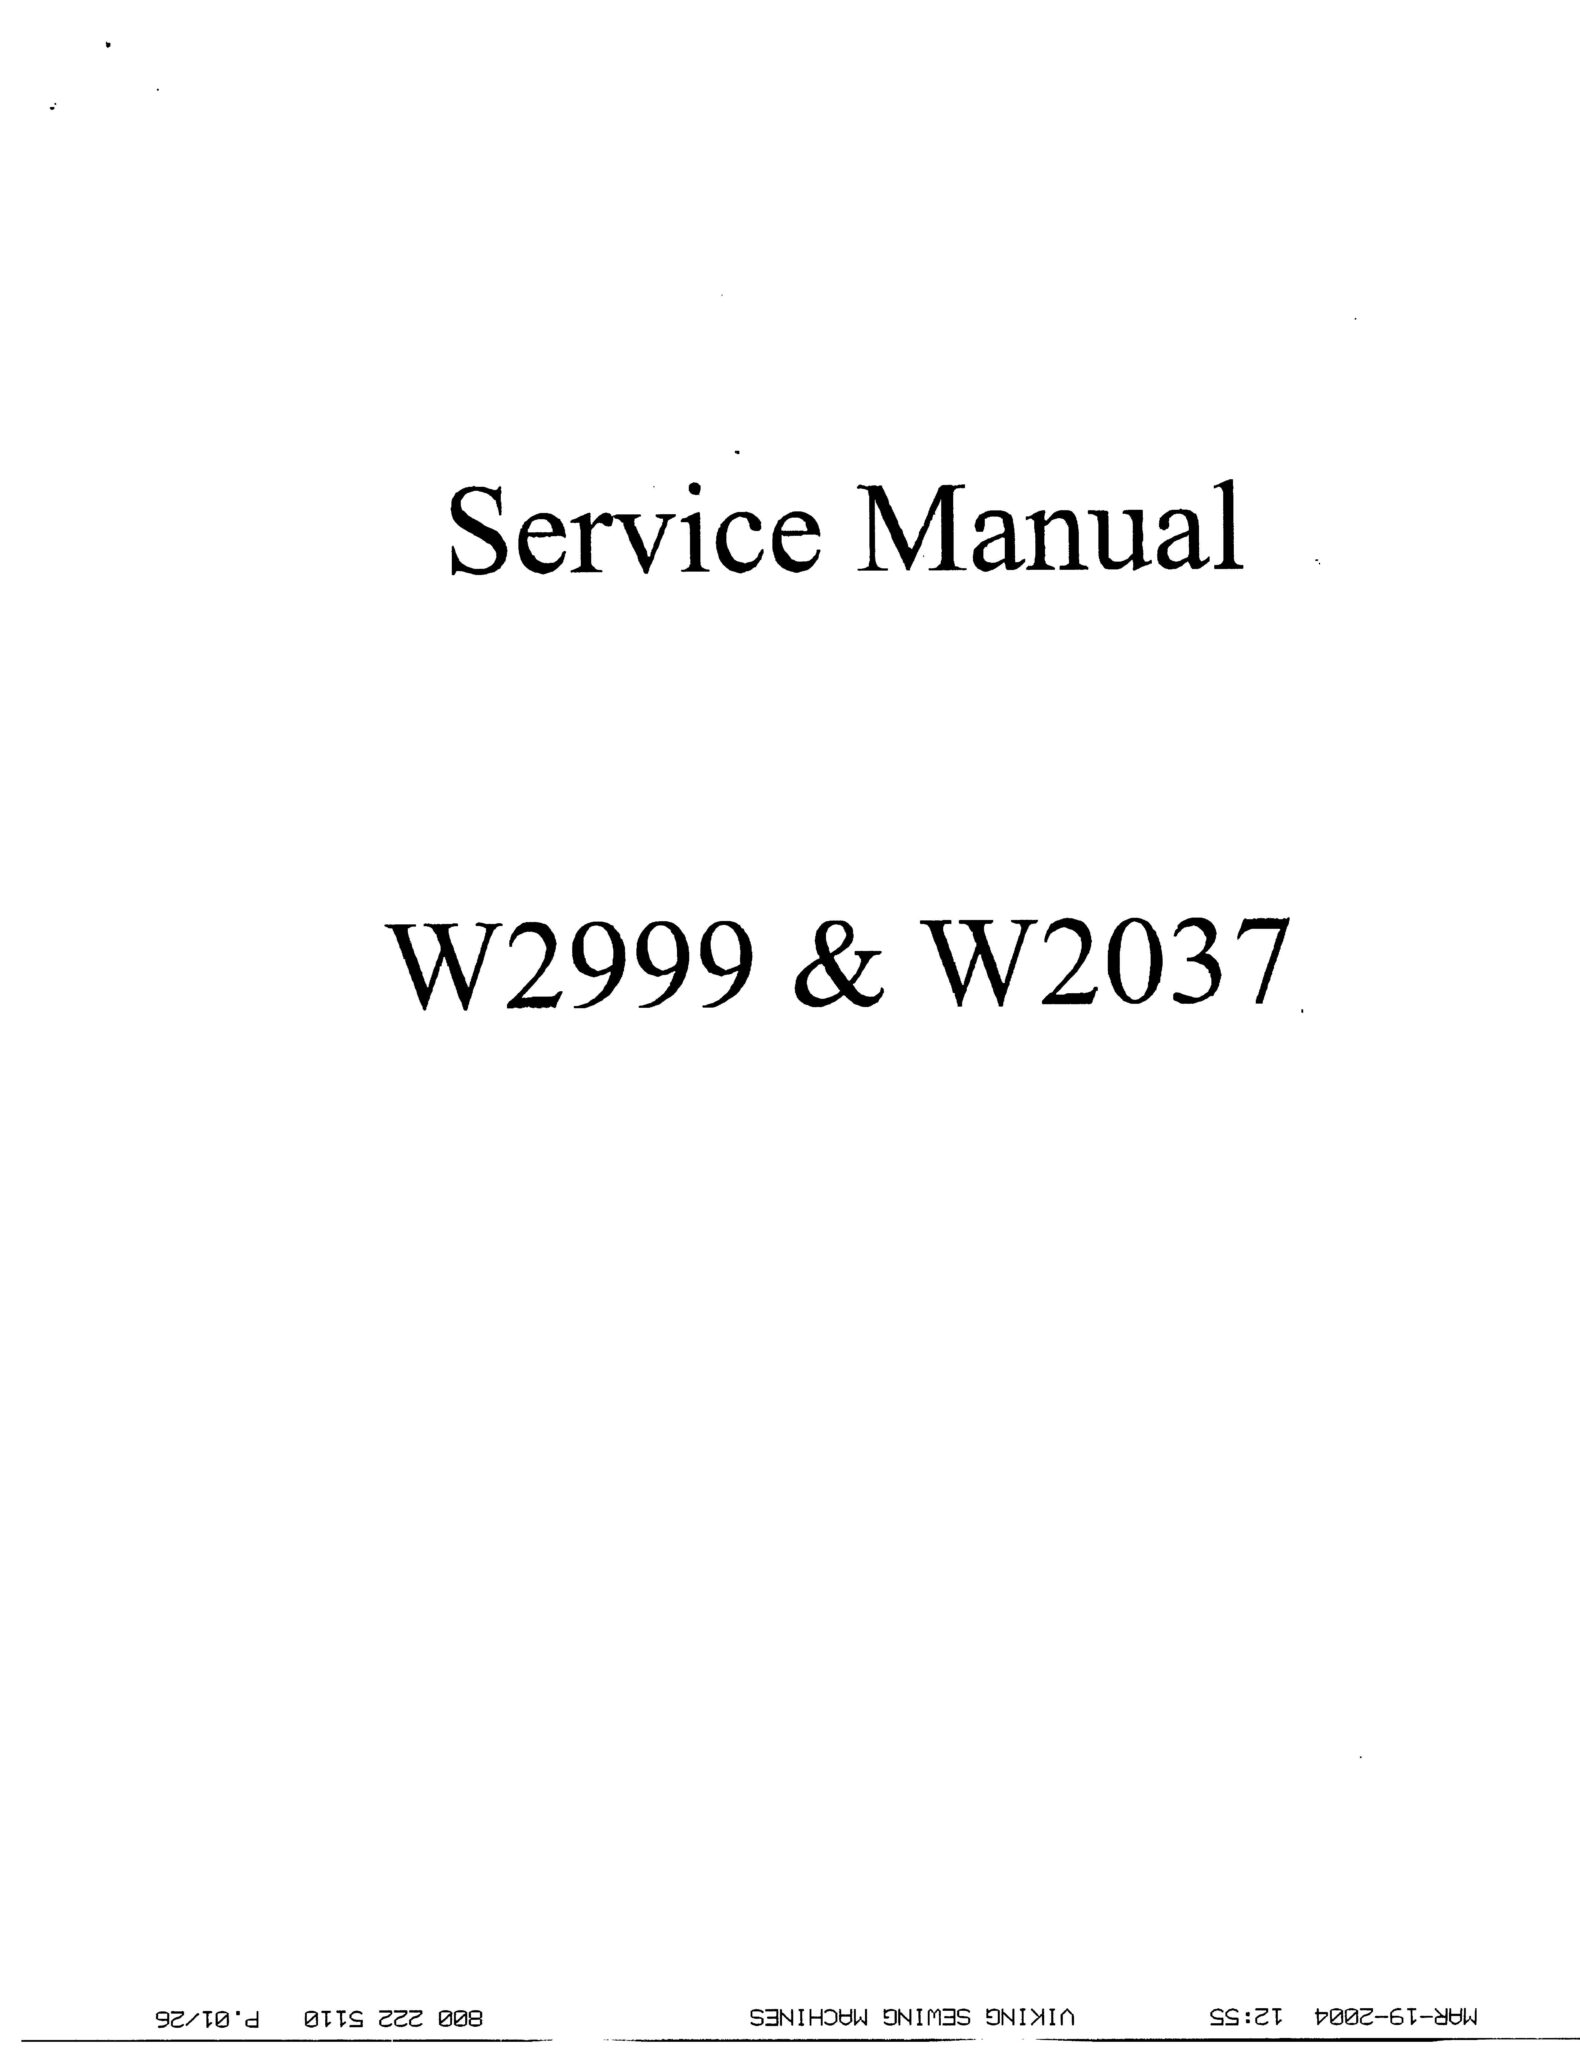 Service Manual For White 2999, 2037 Serger Sewing Machine